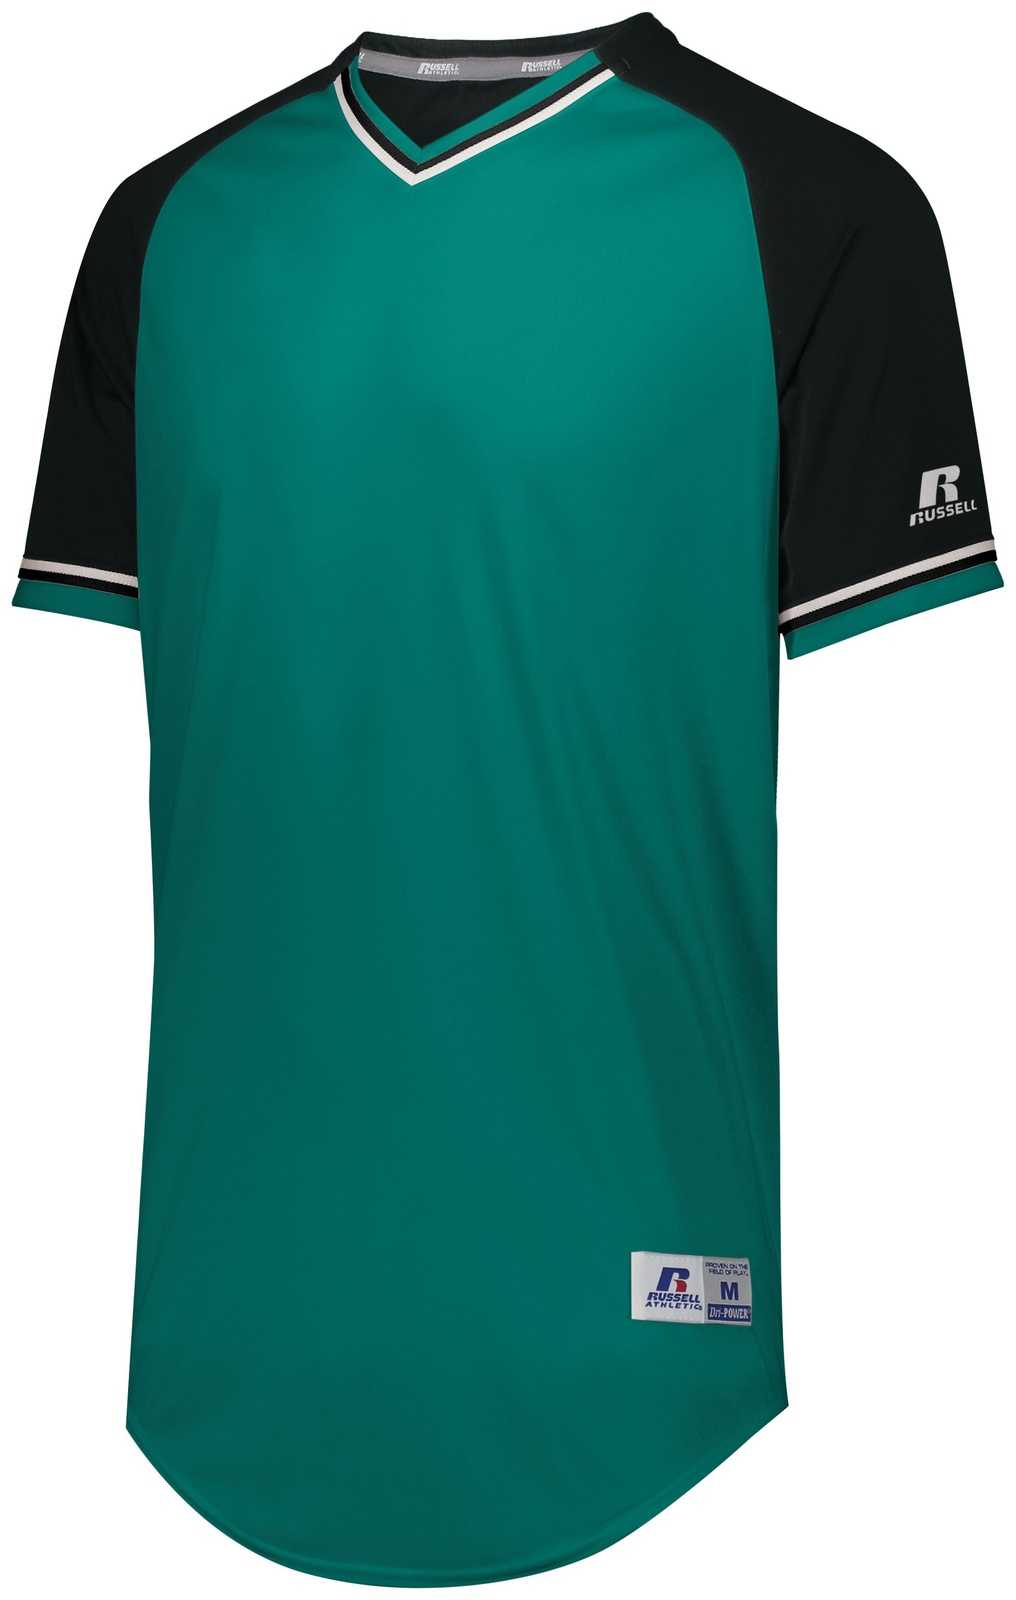 Russell R01X3M Classic V-Neck Jersey - Aqua Black White - HIT a Double